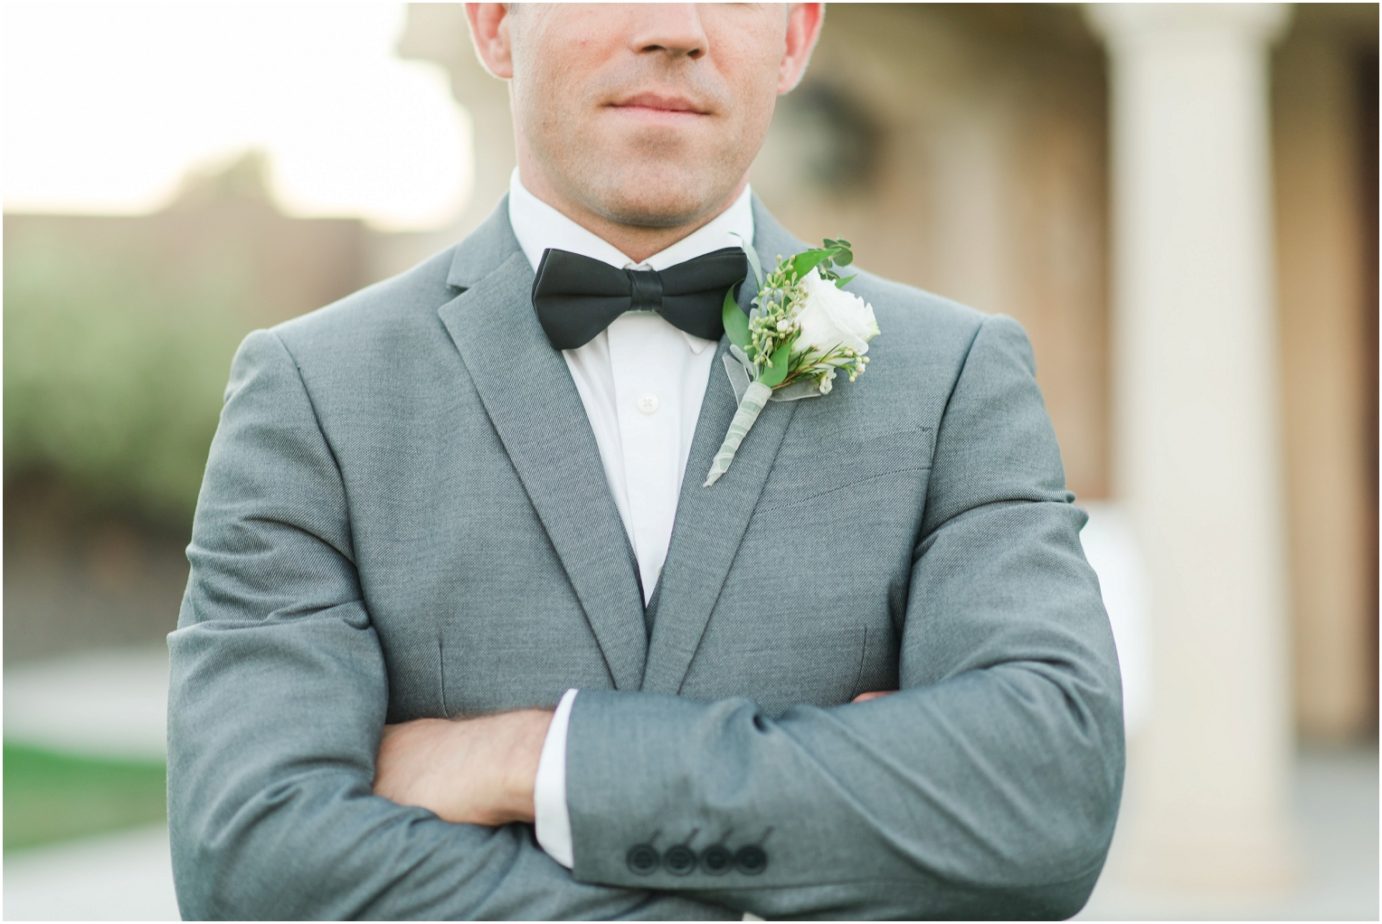 Chandler Reach Wedding Moscow Mule Inspiration Shoot Groom in grey suit